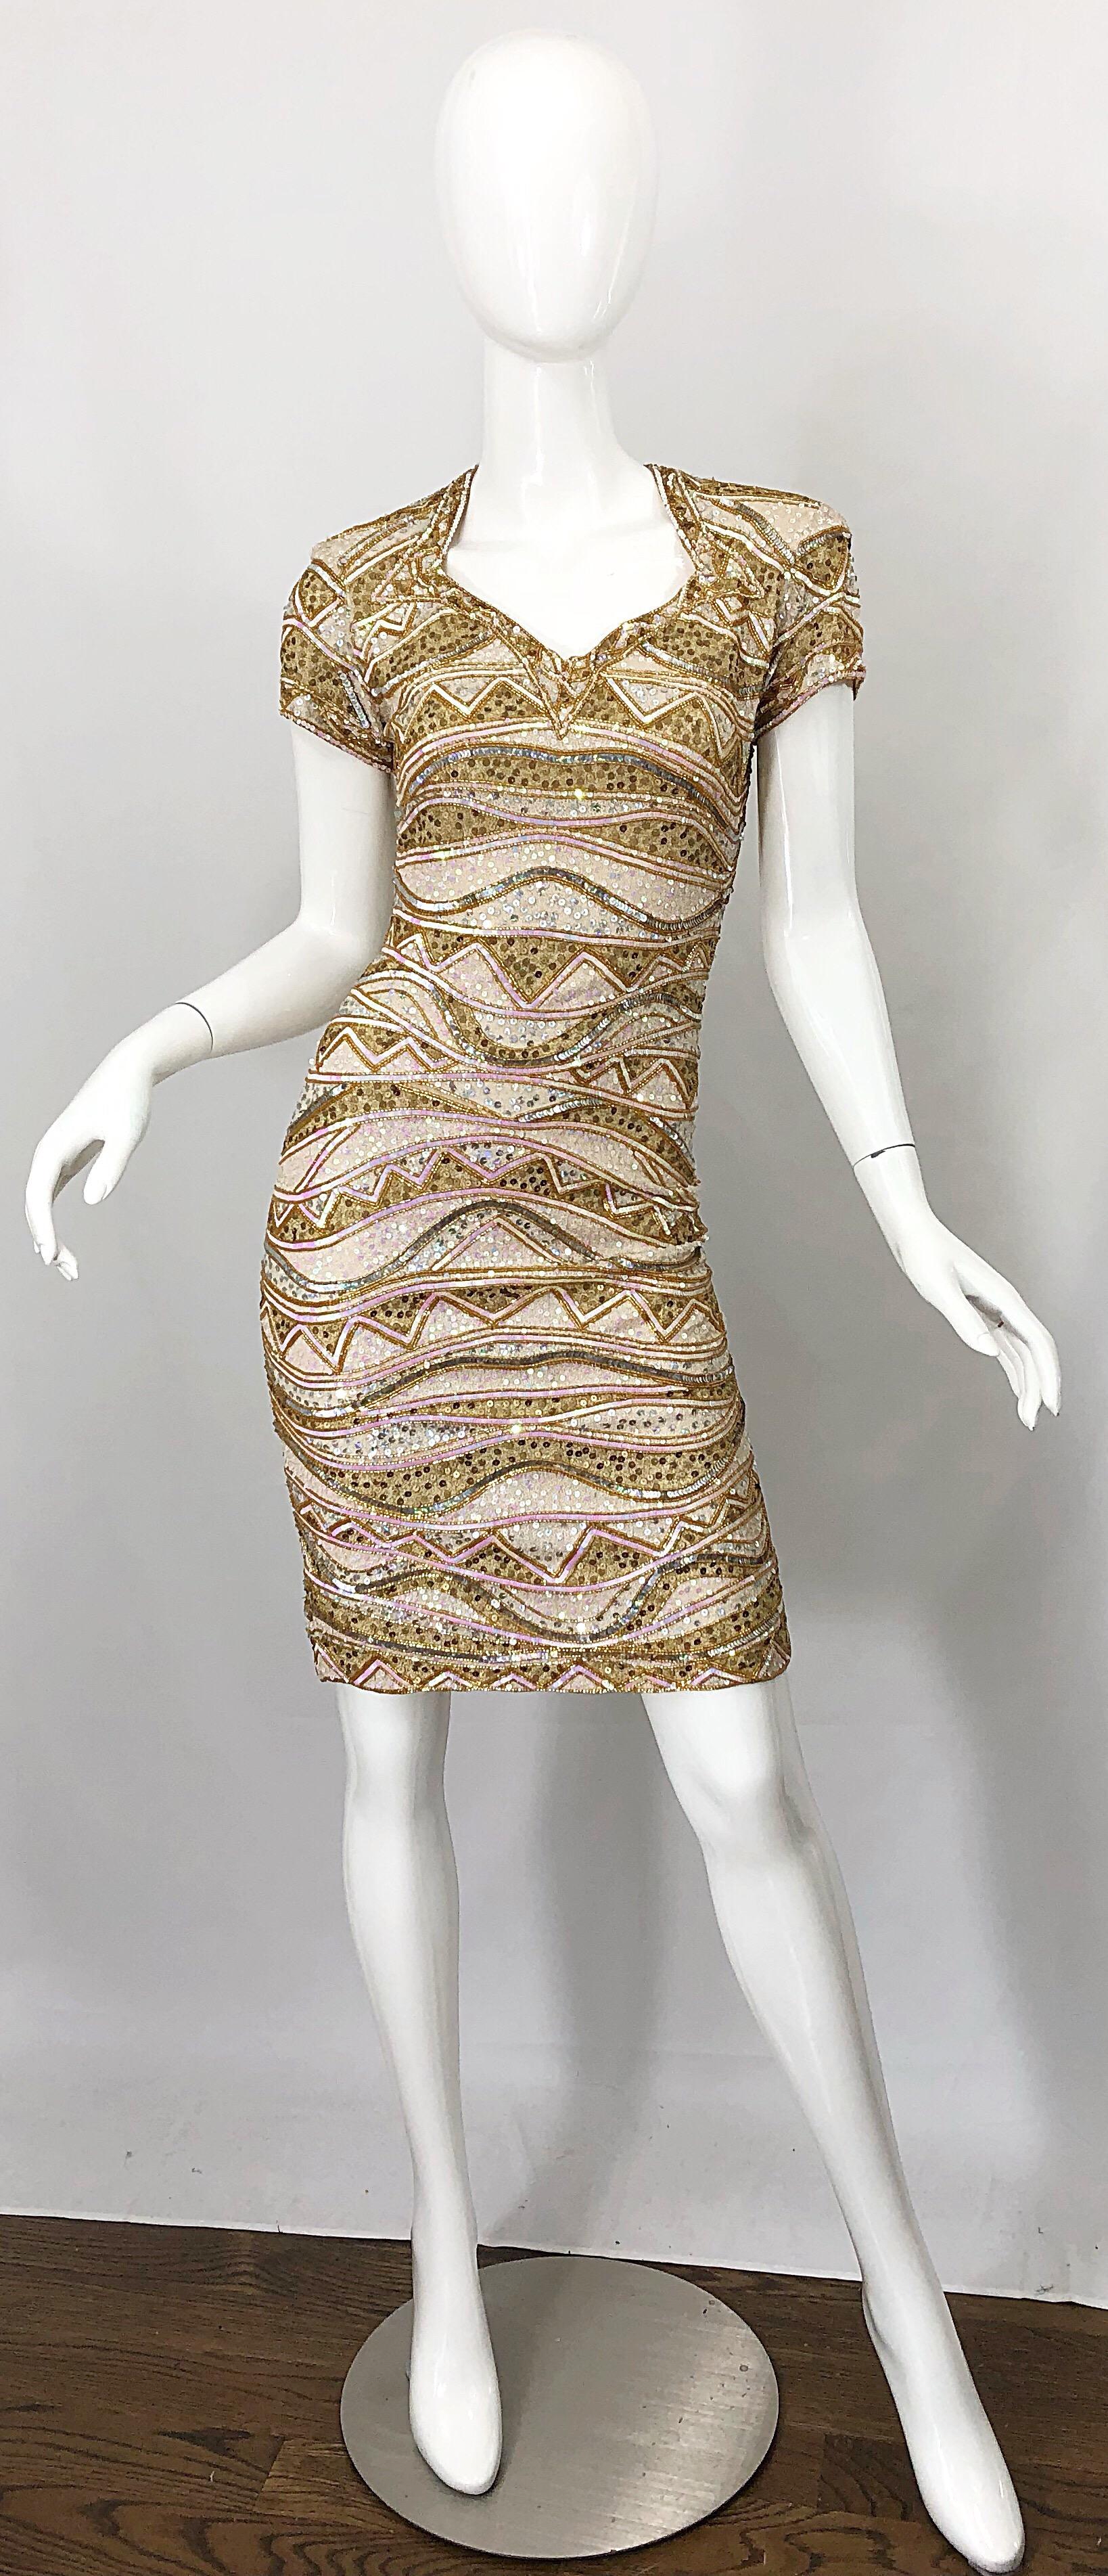 Beautiful vintage (with original tags still attached) NAEEM KHAN beaded and sequined silk bodycon dress! Features thousands of hand-sewn sequins and beads throughout the entire dress. Hidden zipper up the back with hook-and-eye closure. Shoulder